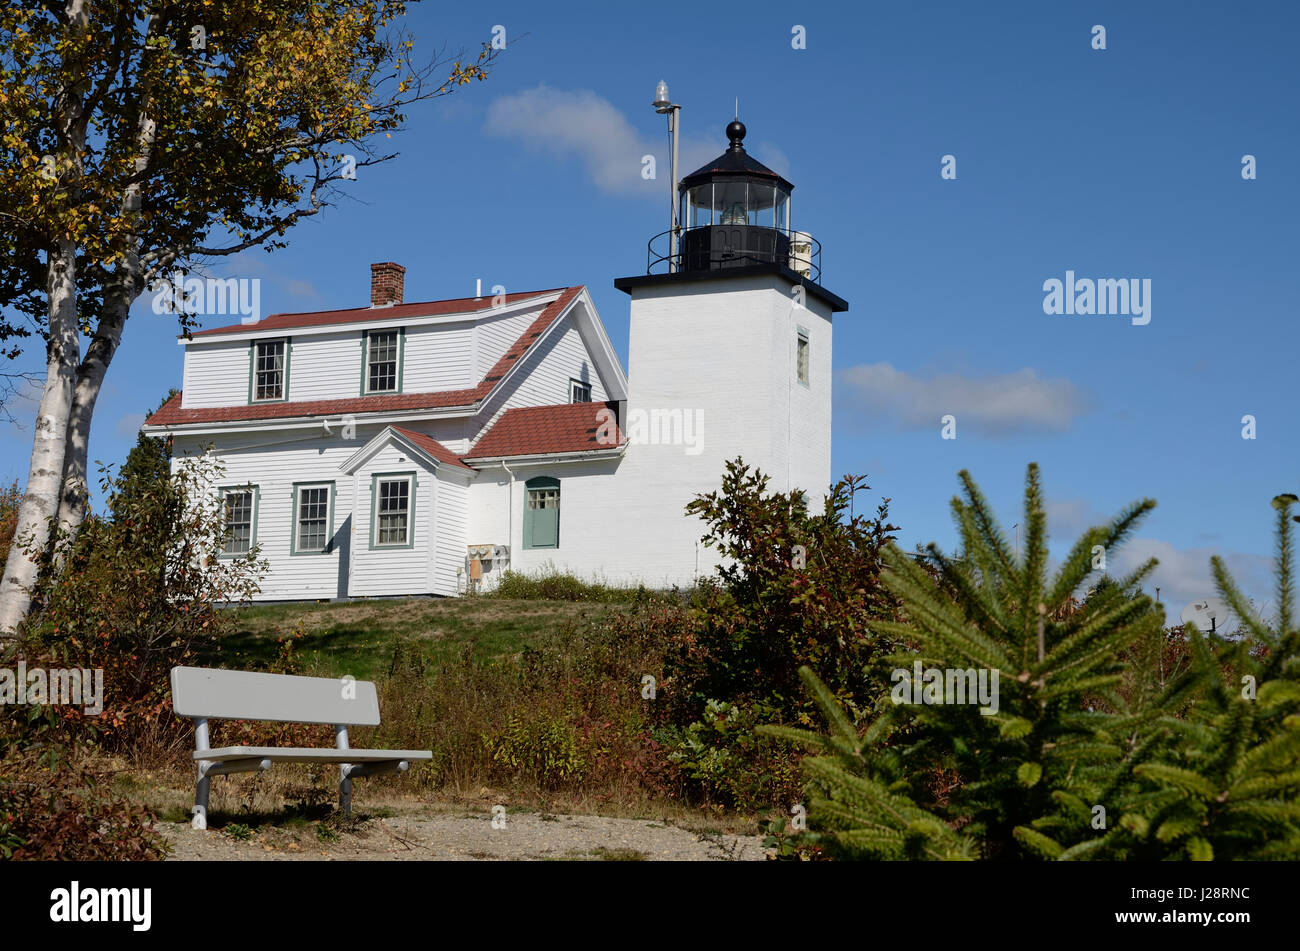 Fort Point Lighthouse on the Penobscot River near Stockton Springs, Maine.In the foreground there are a bench. Blue sky with 2 clouds. Stock Photo